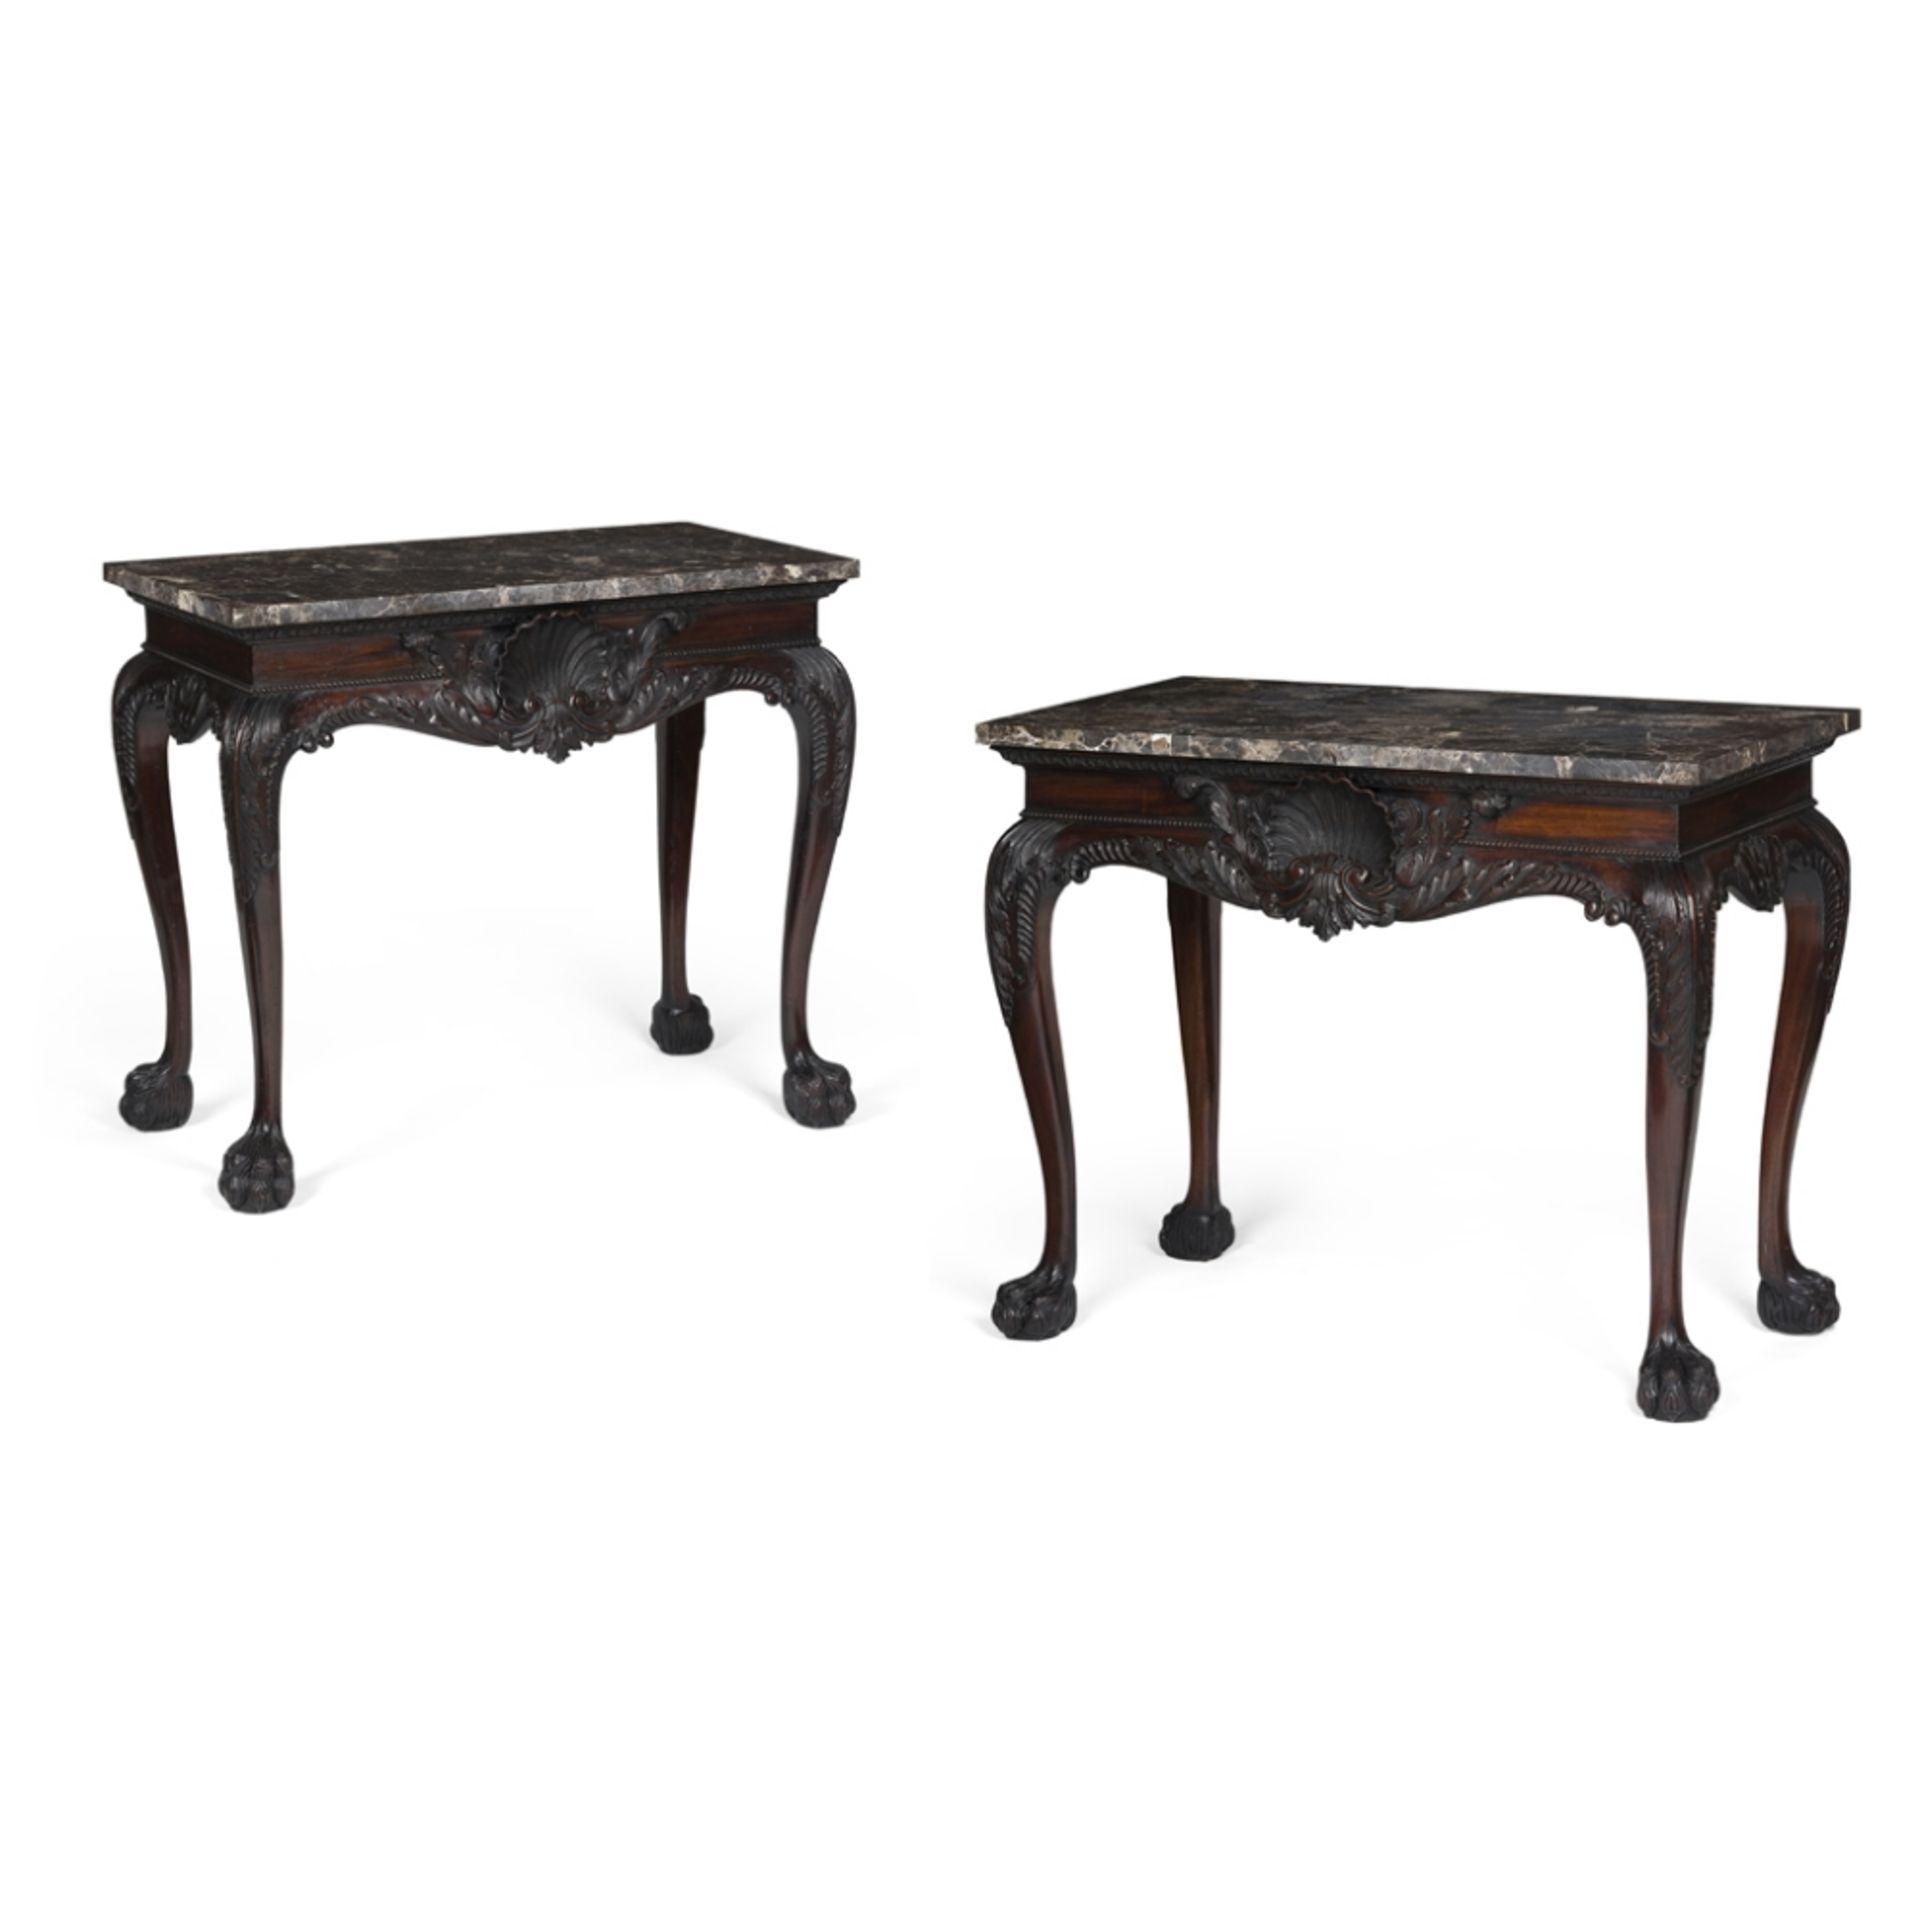 PAIR OF GEORGE II STYLE MAHOGANY MARBLE TOP SIDE TABLES, IN THE MANNER OF HICKS OF DUBLINMODERN